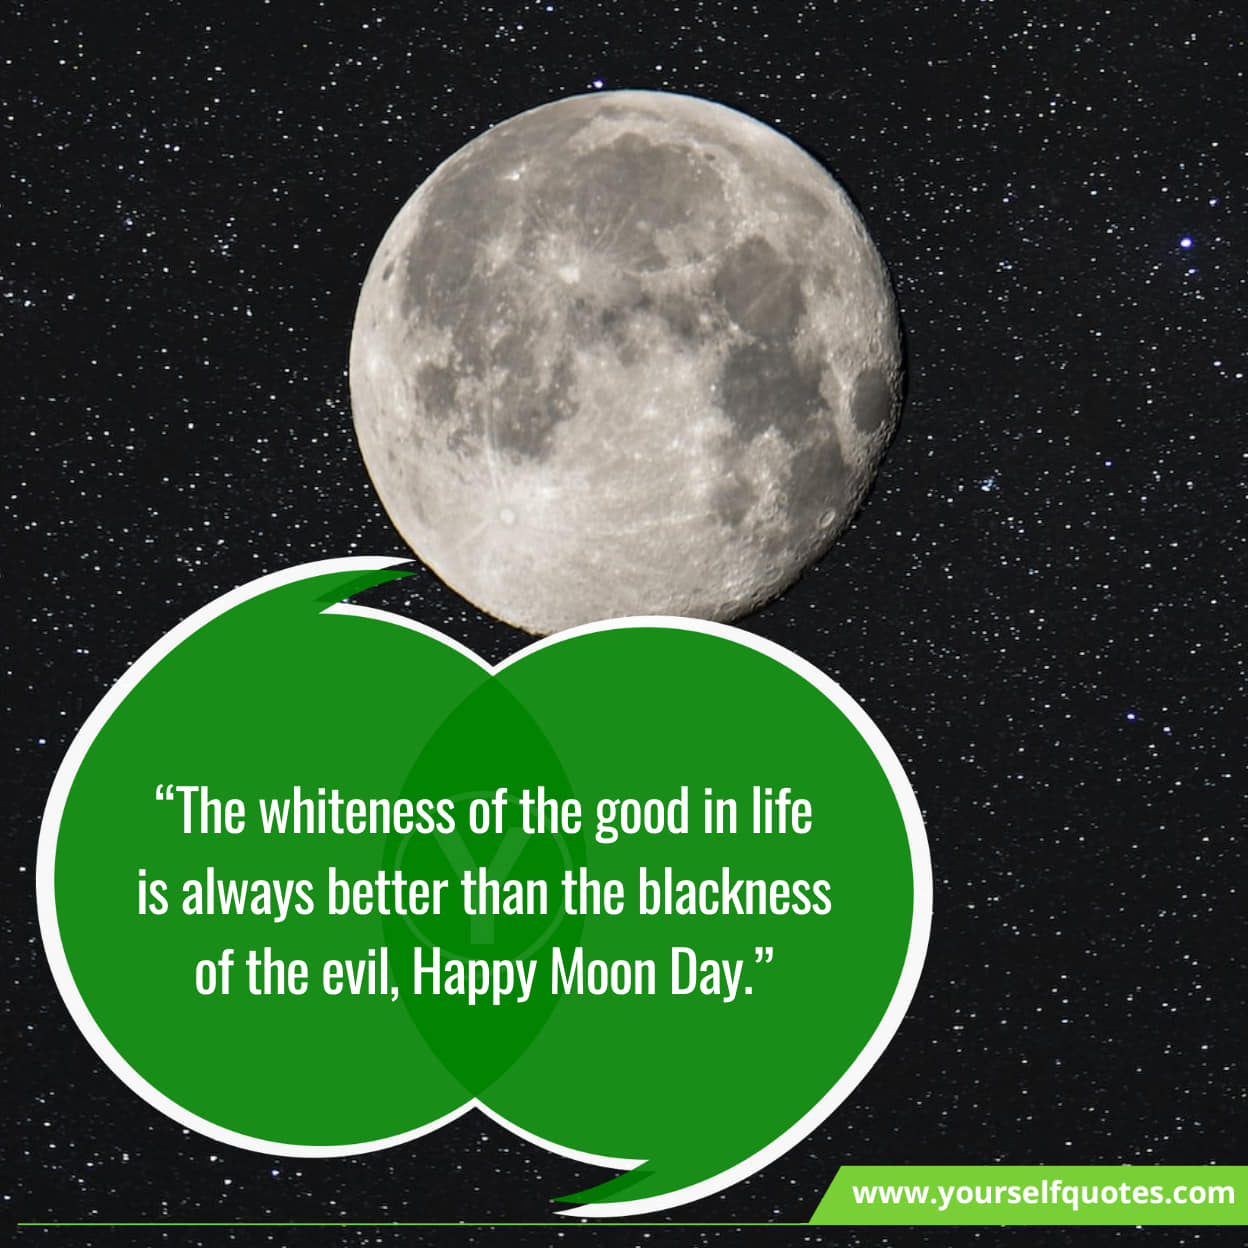 Sending wishes on National Moon Day